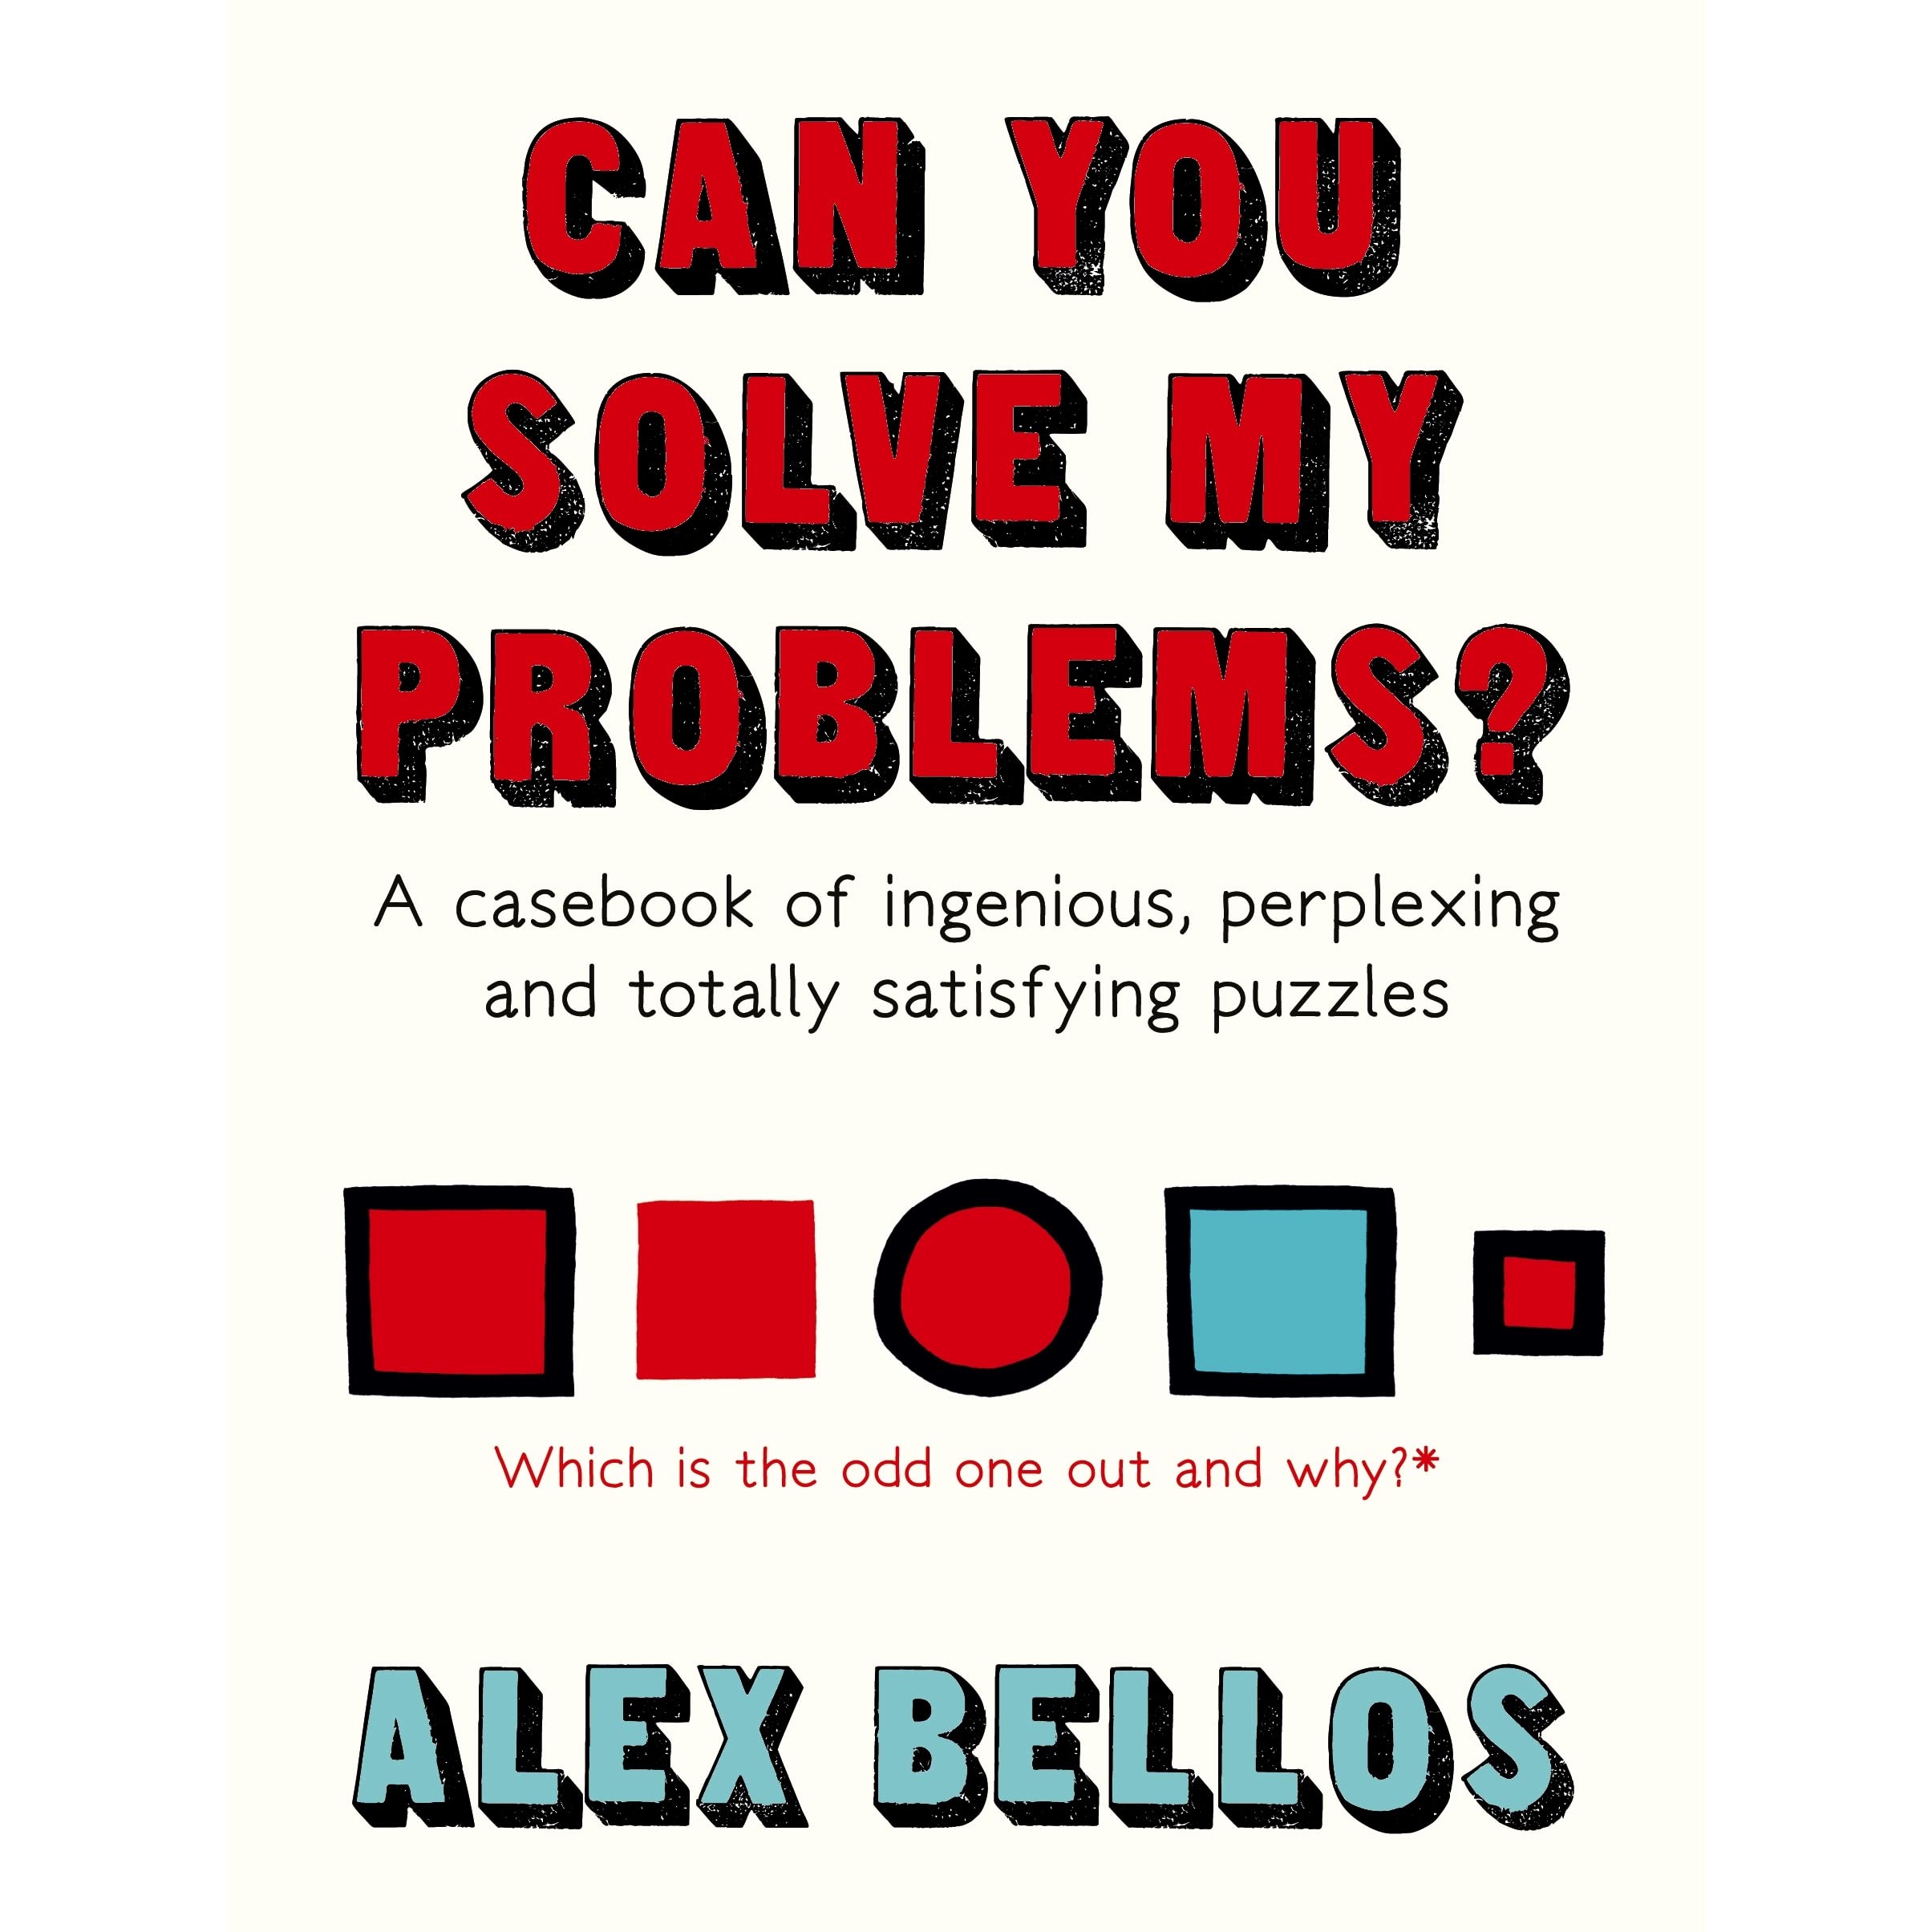 Can You Solve My Problems? A Casebook of Ingenious, Perplexing and Totally Satisfying Puzzles